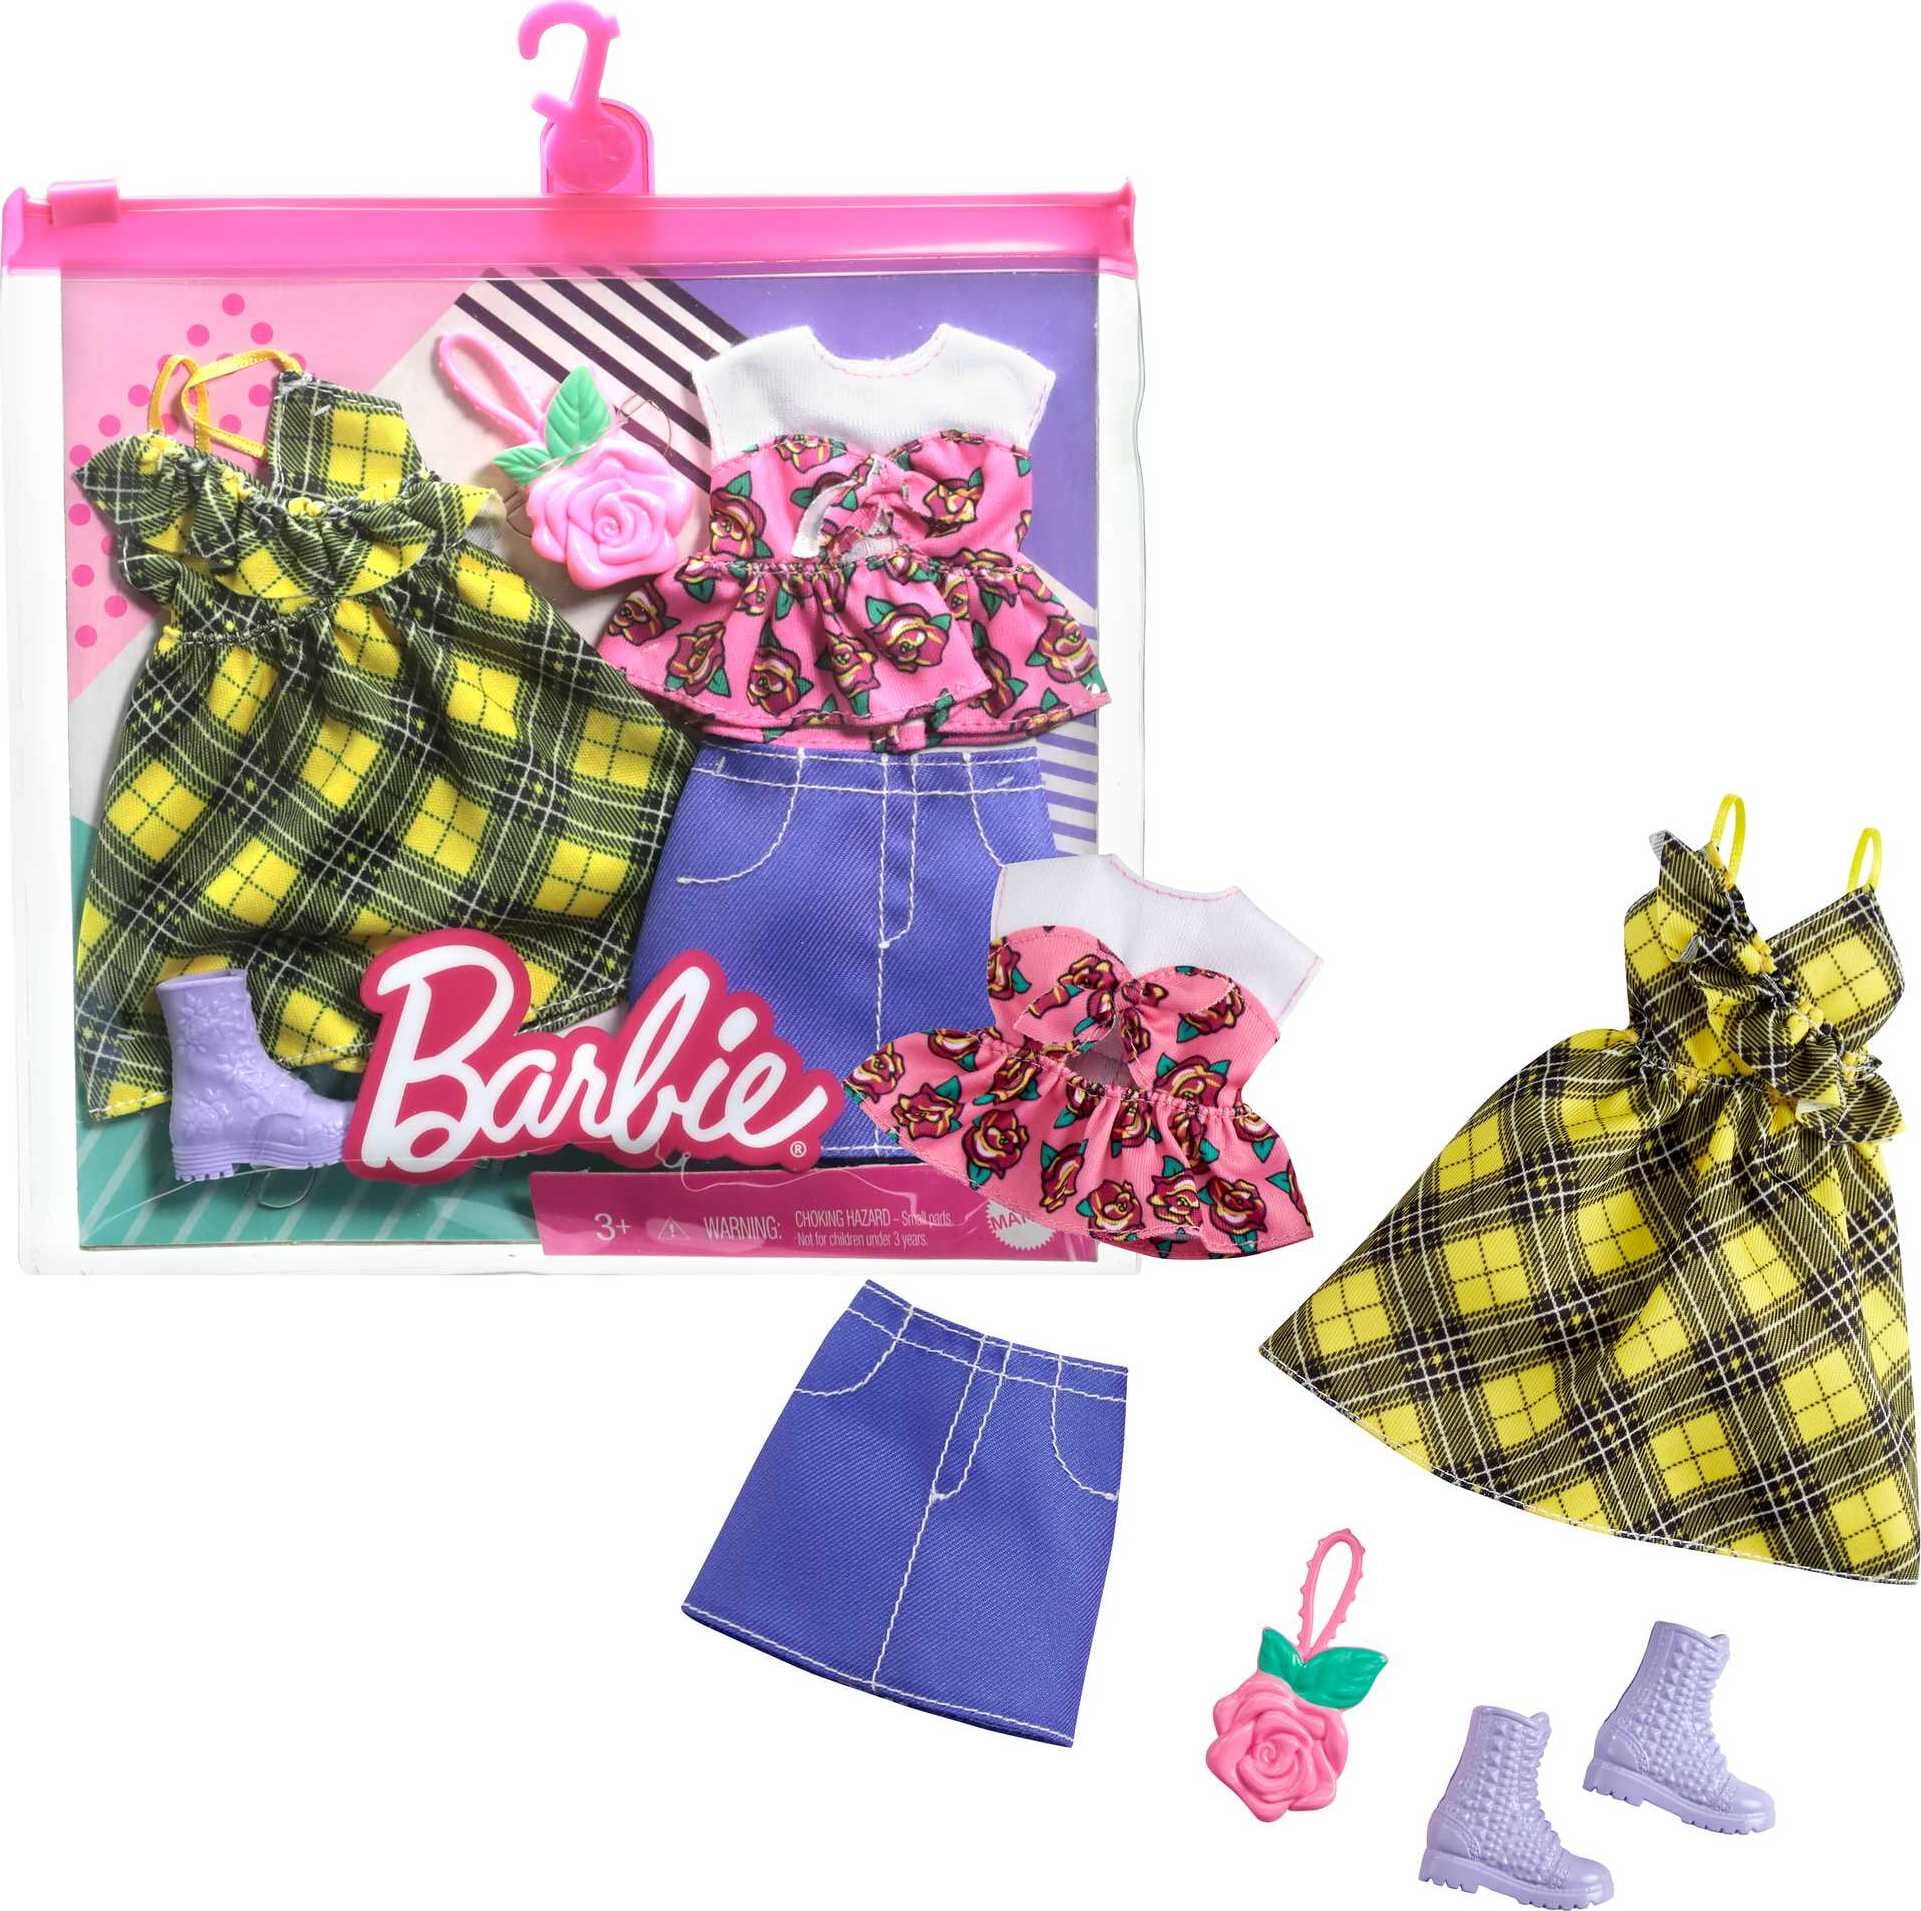 Details about   Barbie Animal Print Denim Ruffle Outfit Fashion Pack with Accessories 